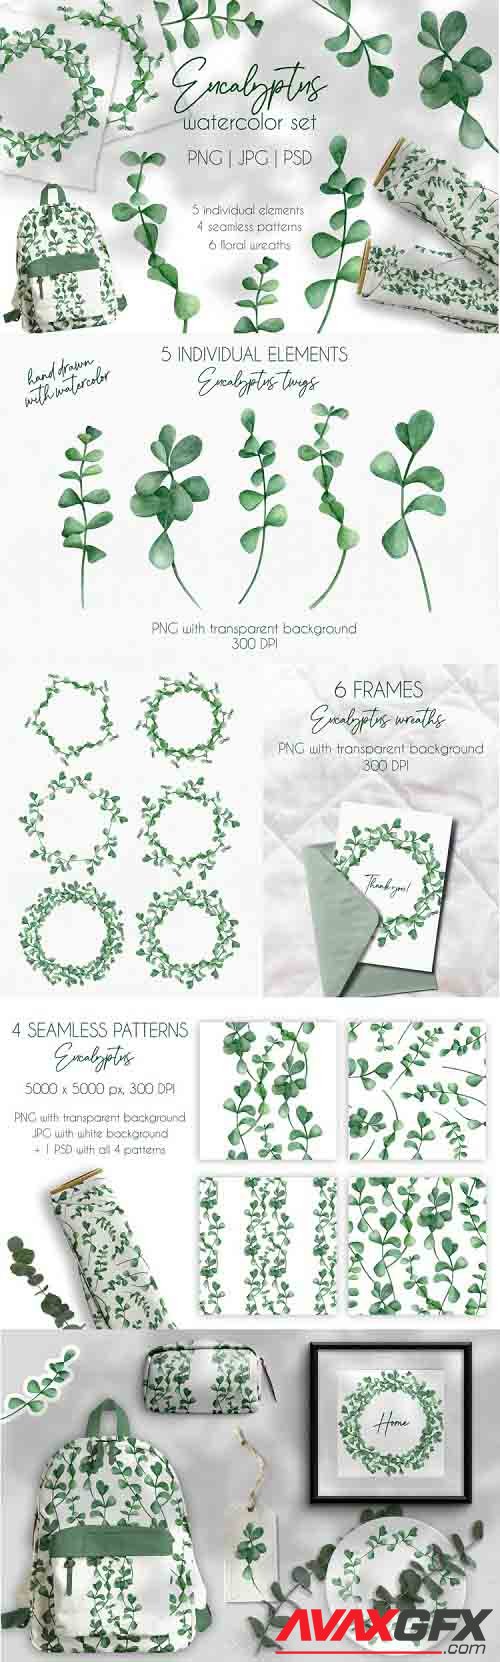 Eucalyptus Watercolor Clipart Collection. Floral Wreaths PNG - 1269033